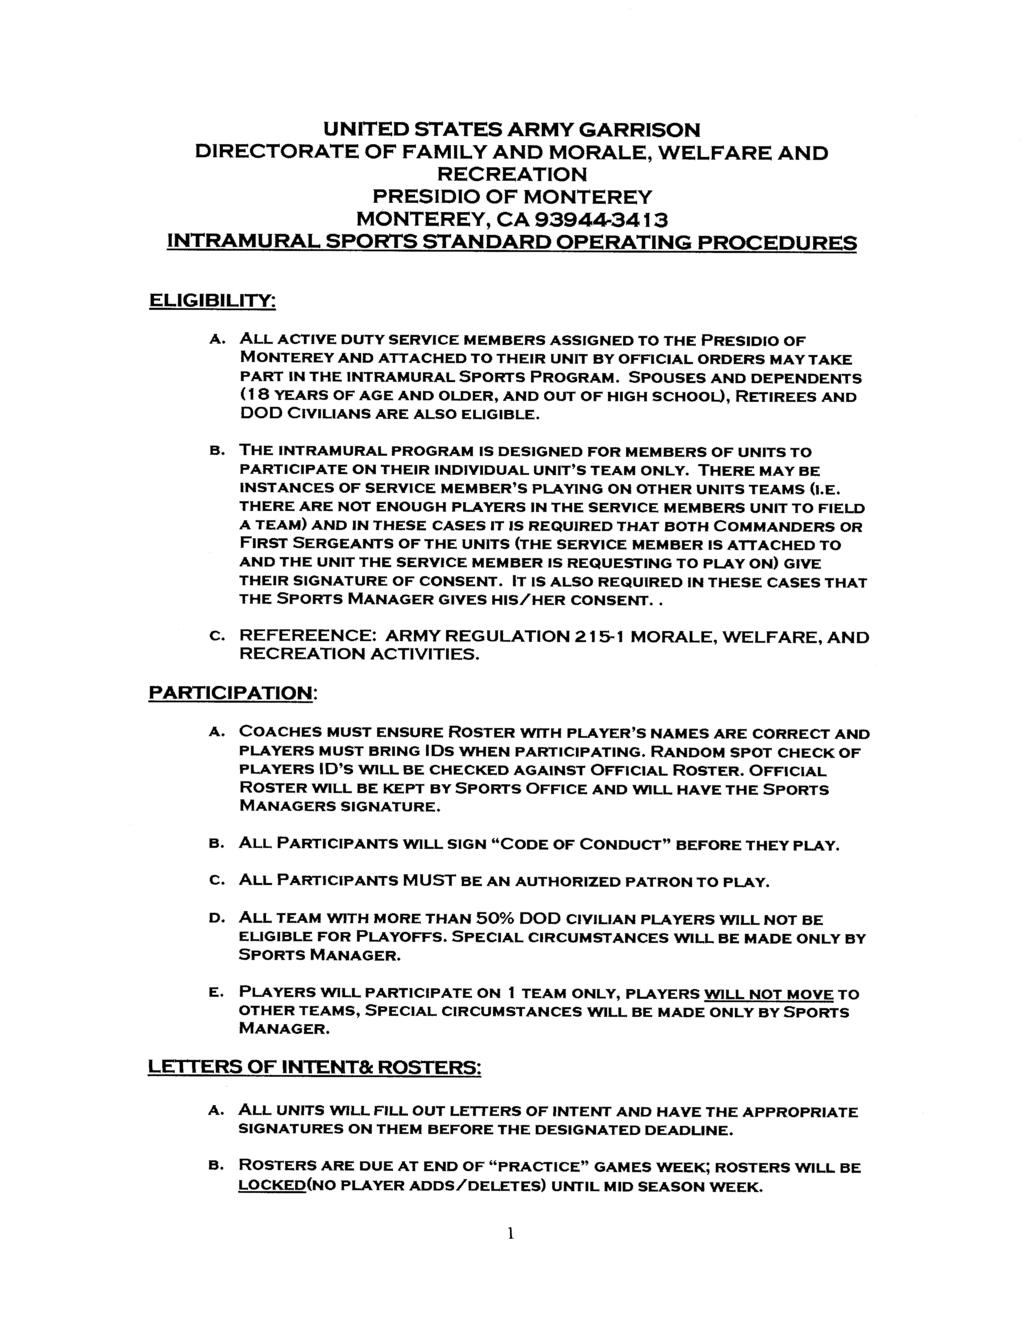 UNITED STATES ARMY GARRISON DIRECTORATE OF FAMILY AND MORALE, WELFARE AND RECREATION PRESIDIO OF MONTEREY MONTEREY, CA 93944-3413 INTRAMURAL SPORTS STANDARD OPERATING PROCEDURES ELIGIBILITY: A.